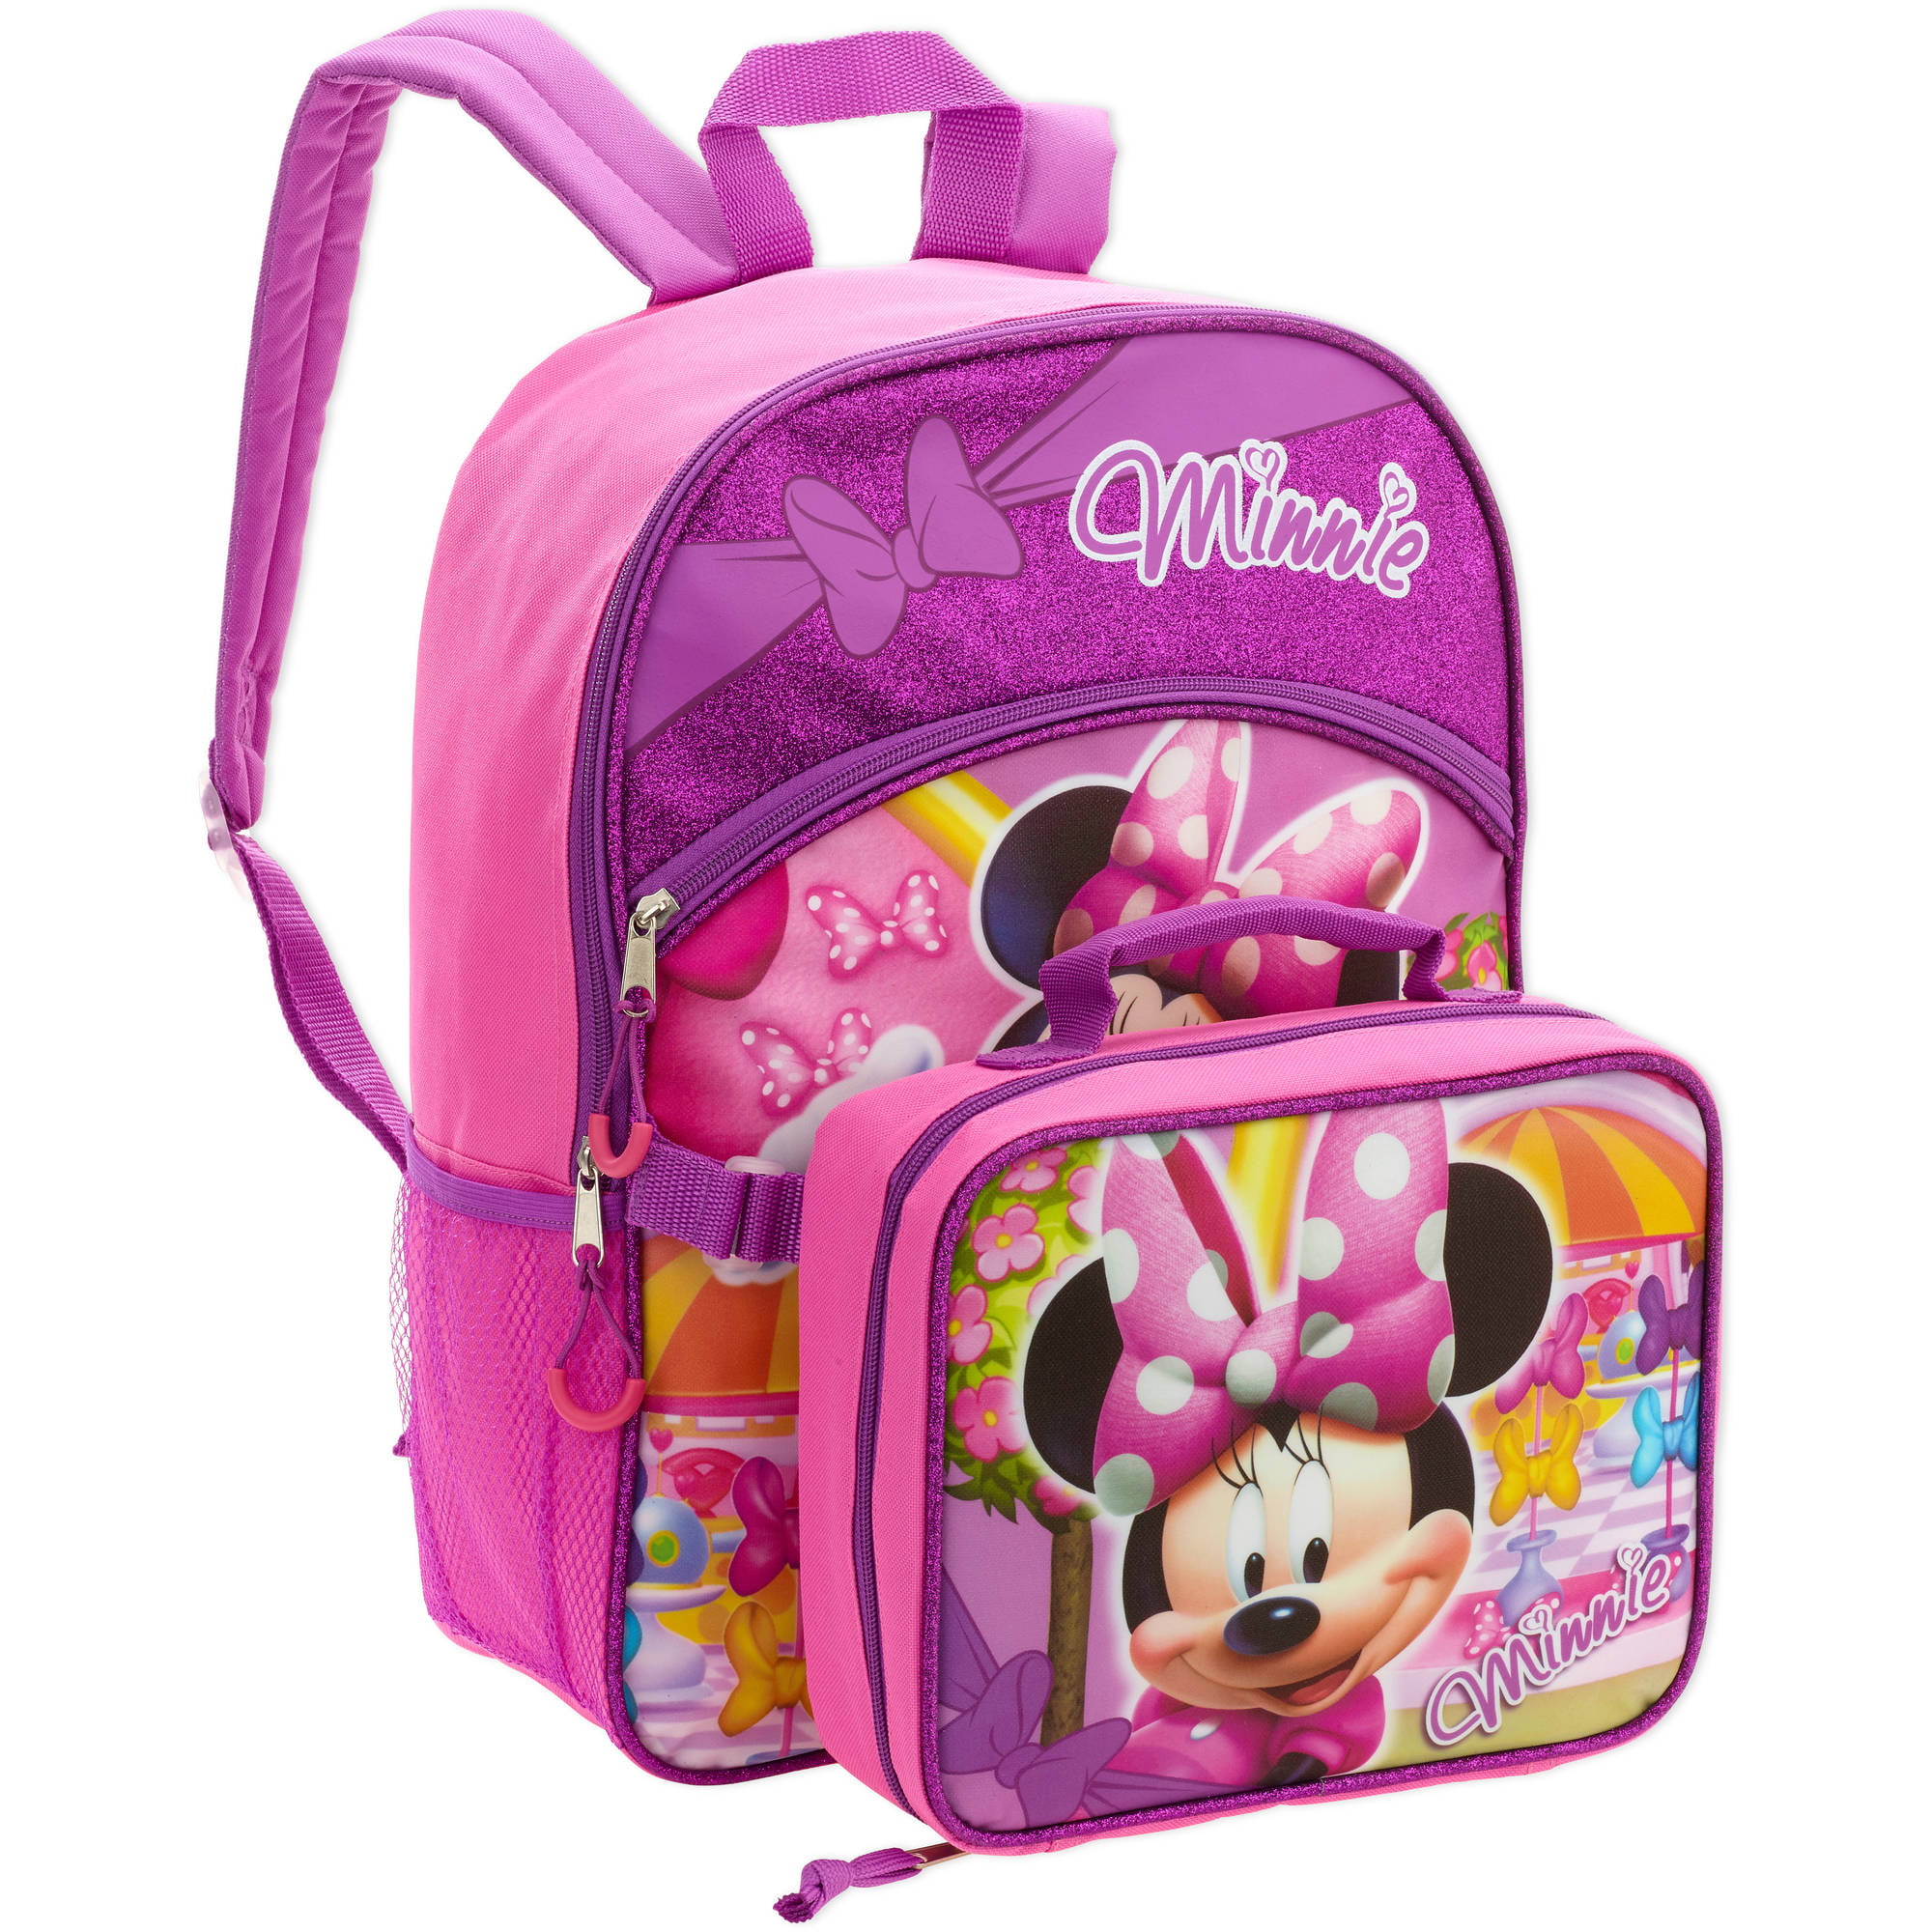 16 Disney Minnie Mouse Full Size Backpack w/ Detachable Lunch Bag